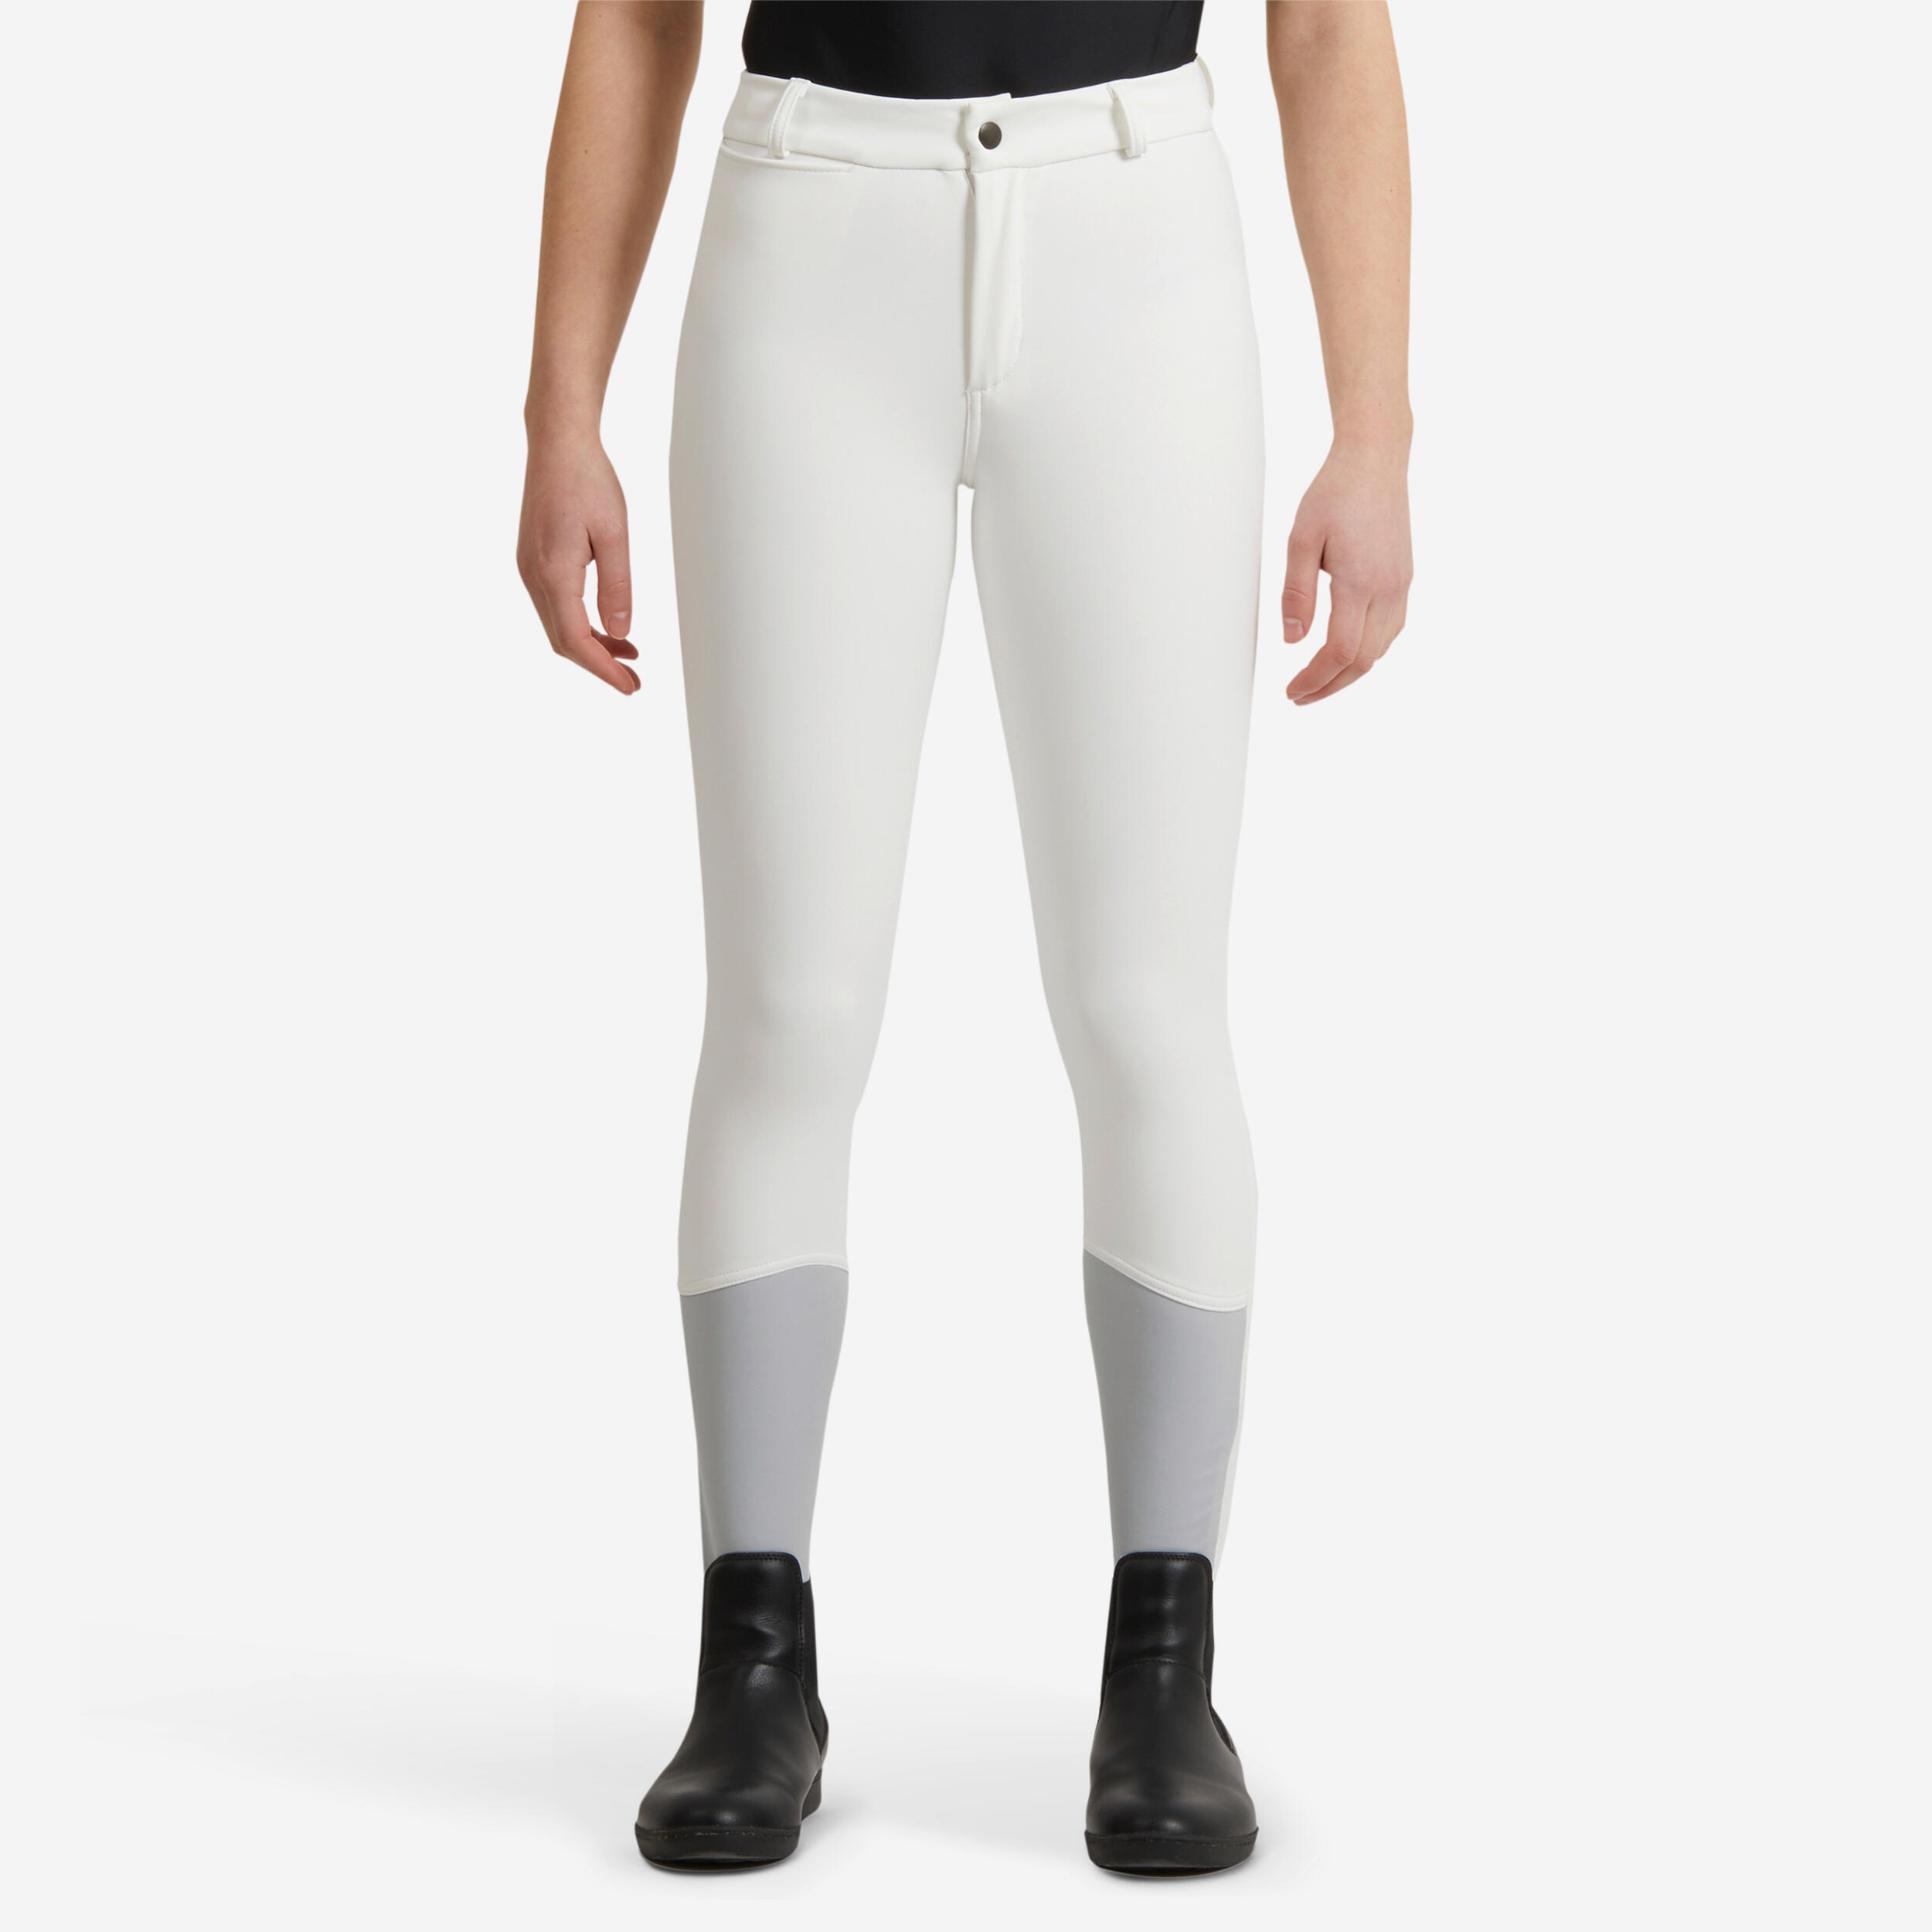 Kids' Horse Riding Warm and Water Repellent Competition Jodhpurs 500 Kipwarm - White 1/9